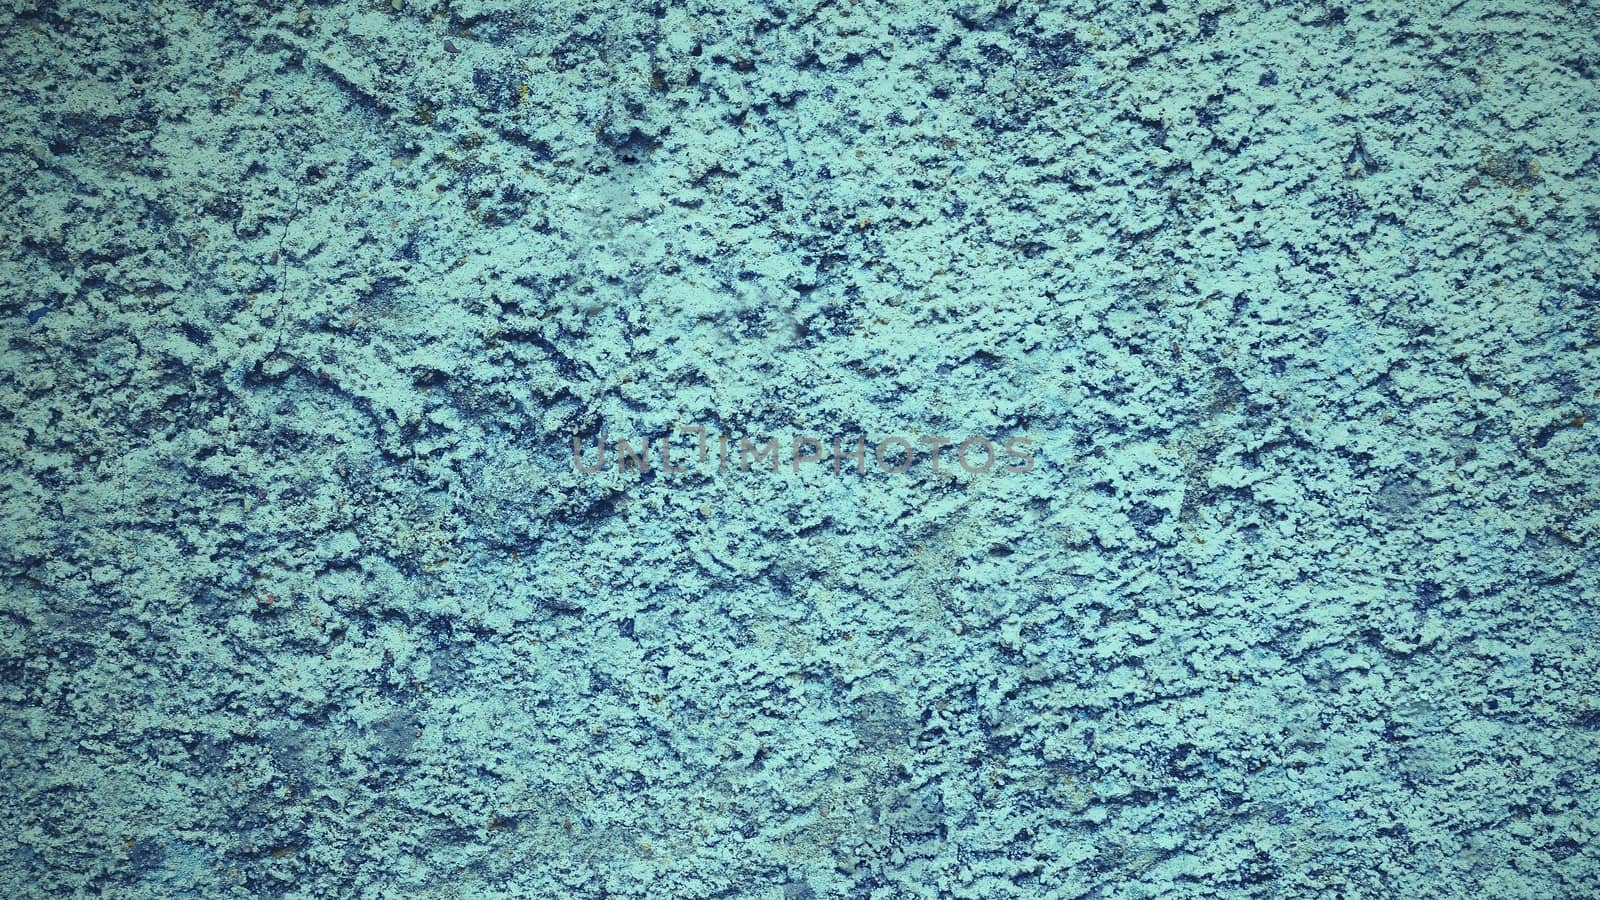 Blue grunge background with concrete texture.